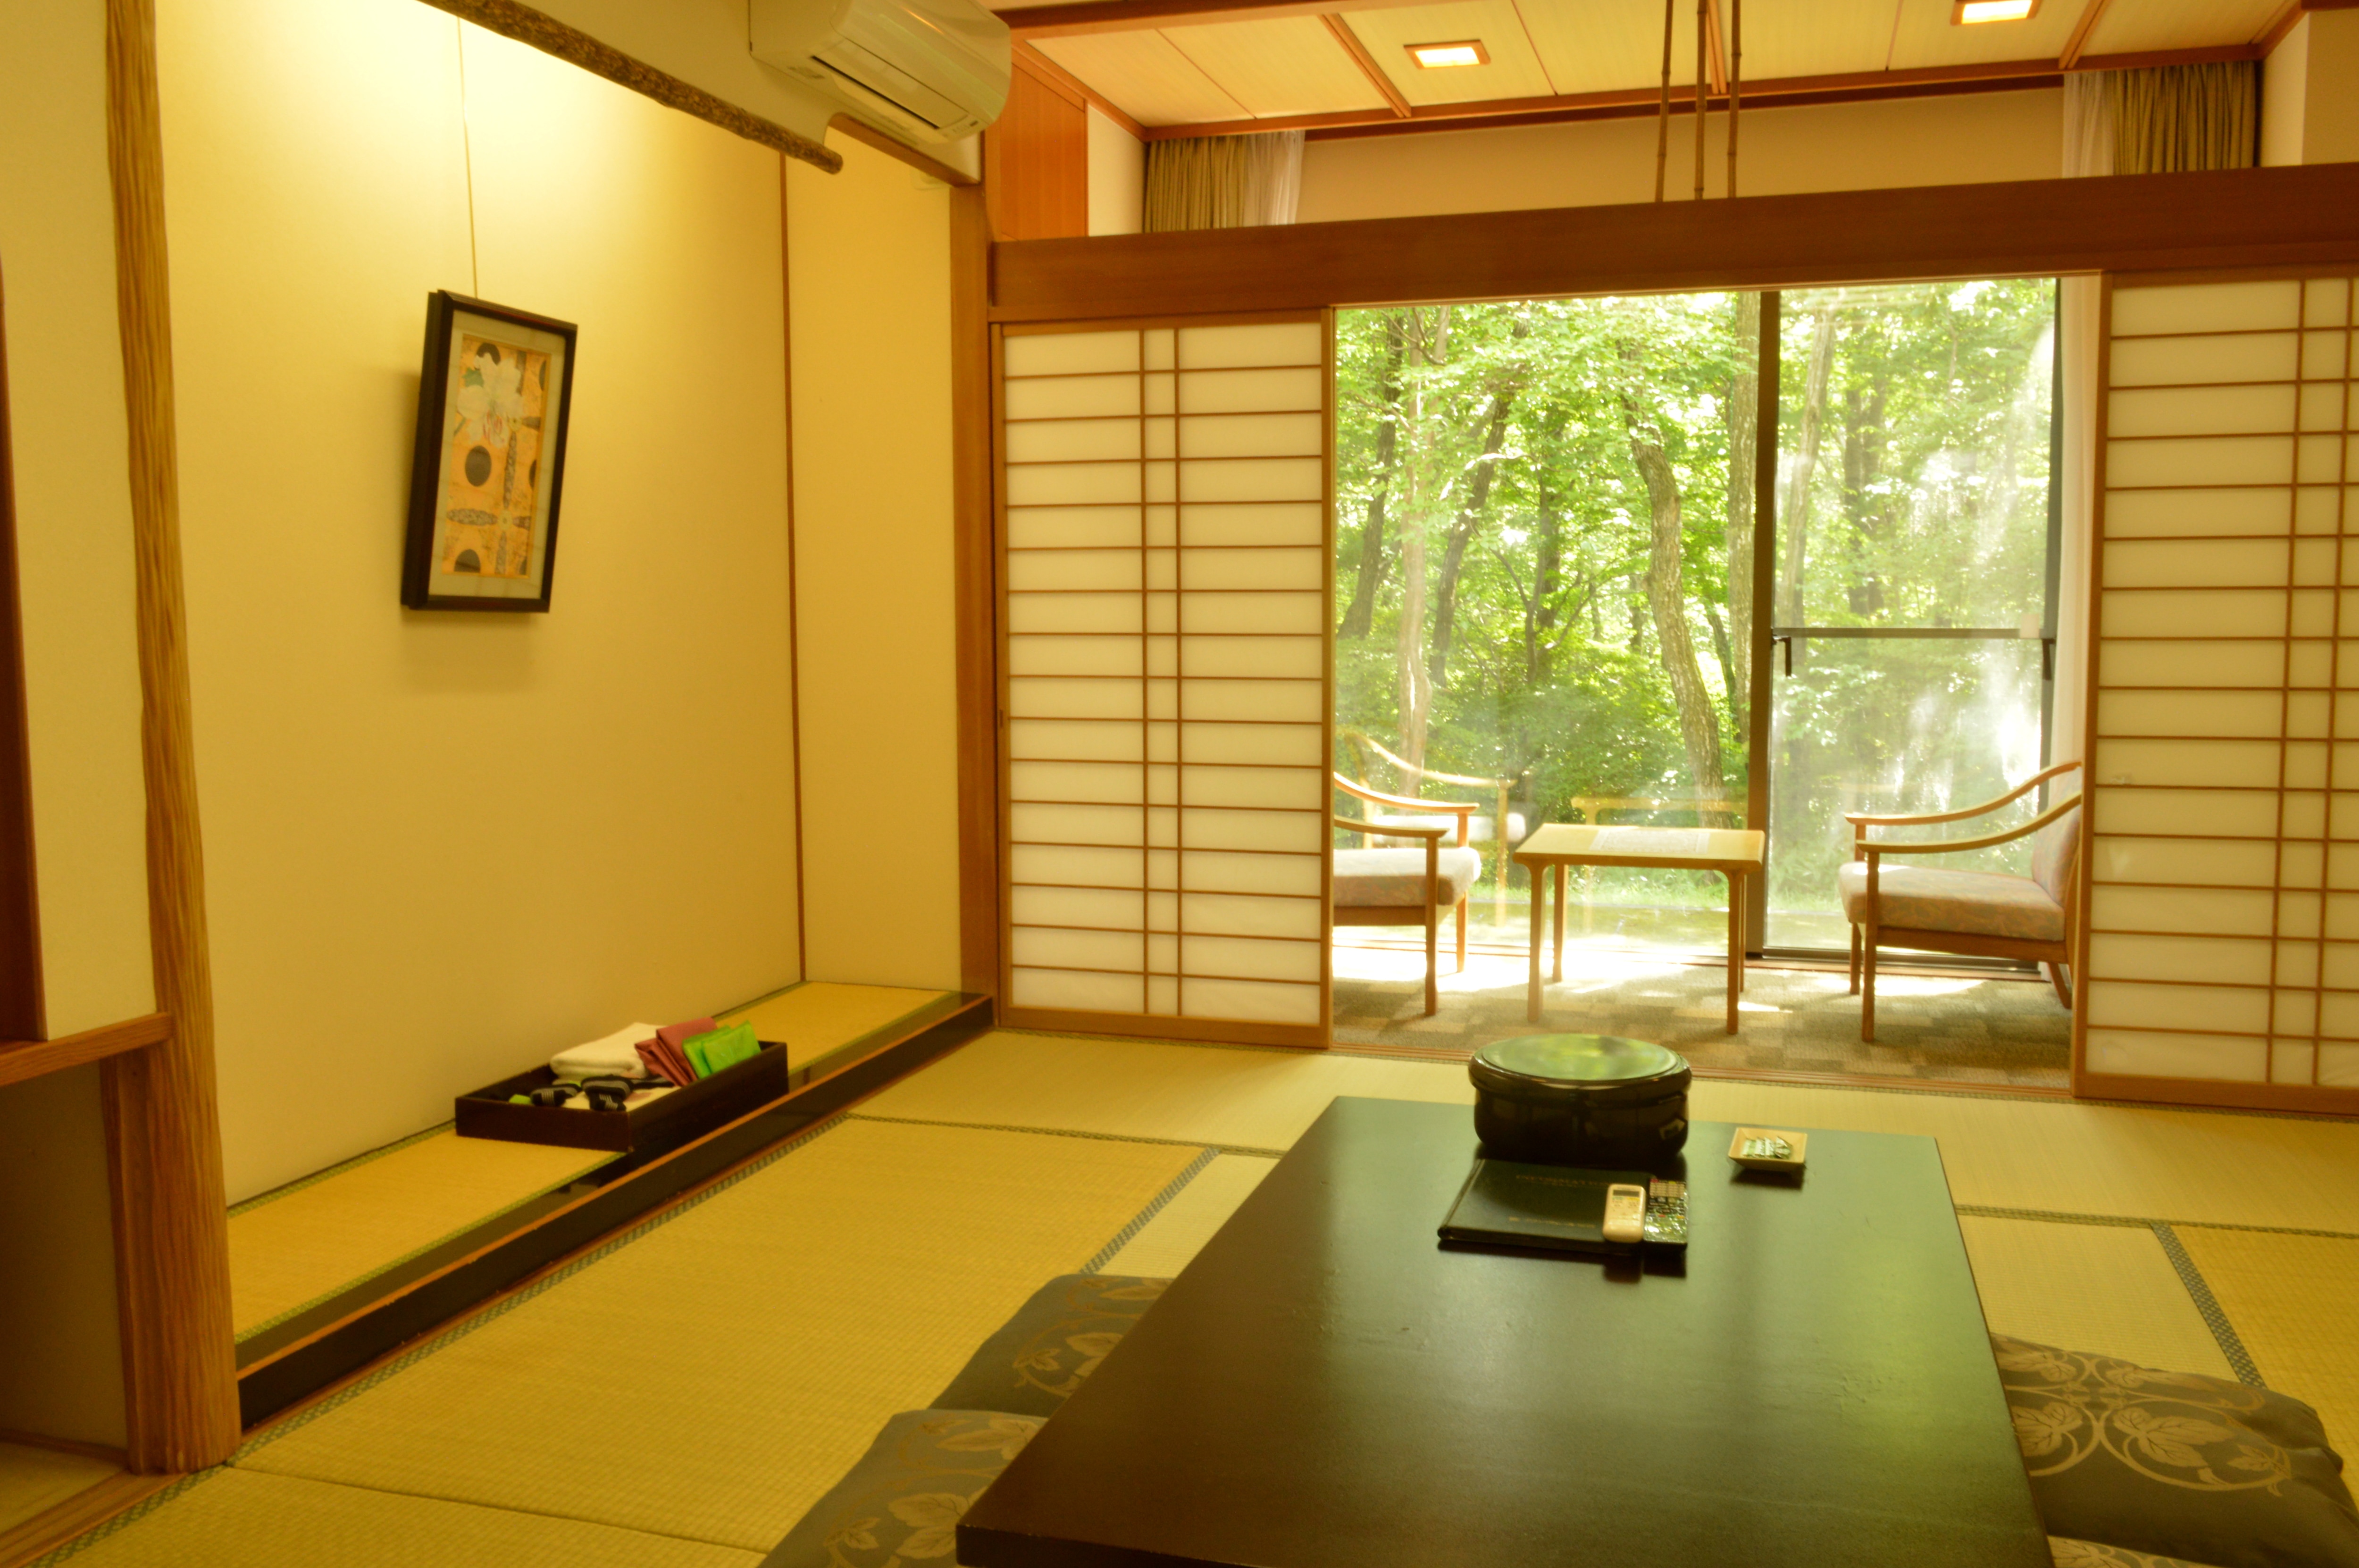 A Japanese-style room where you can relax while feeling the nature